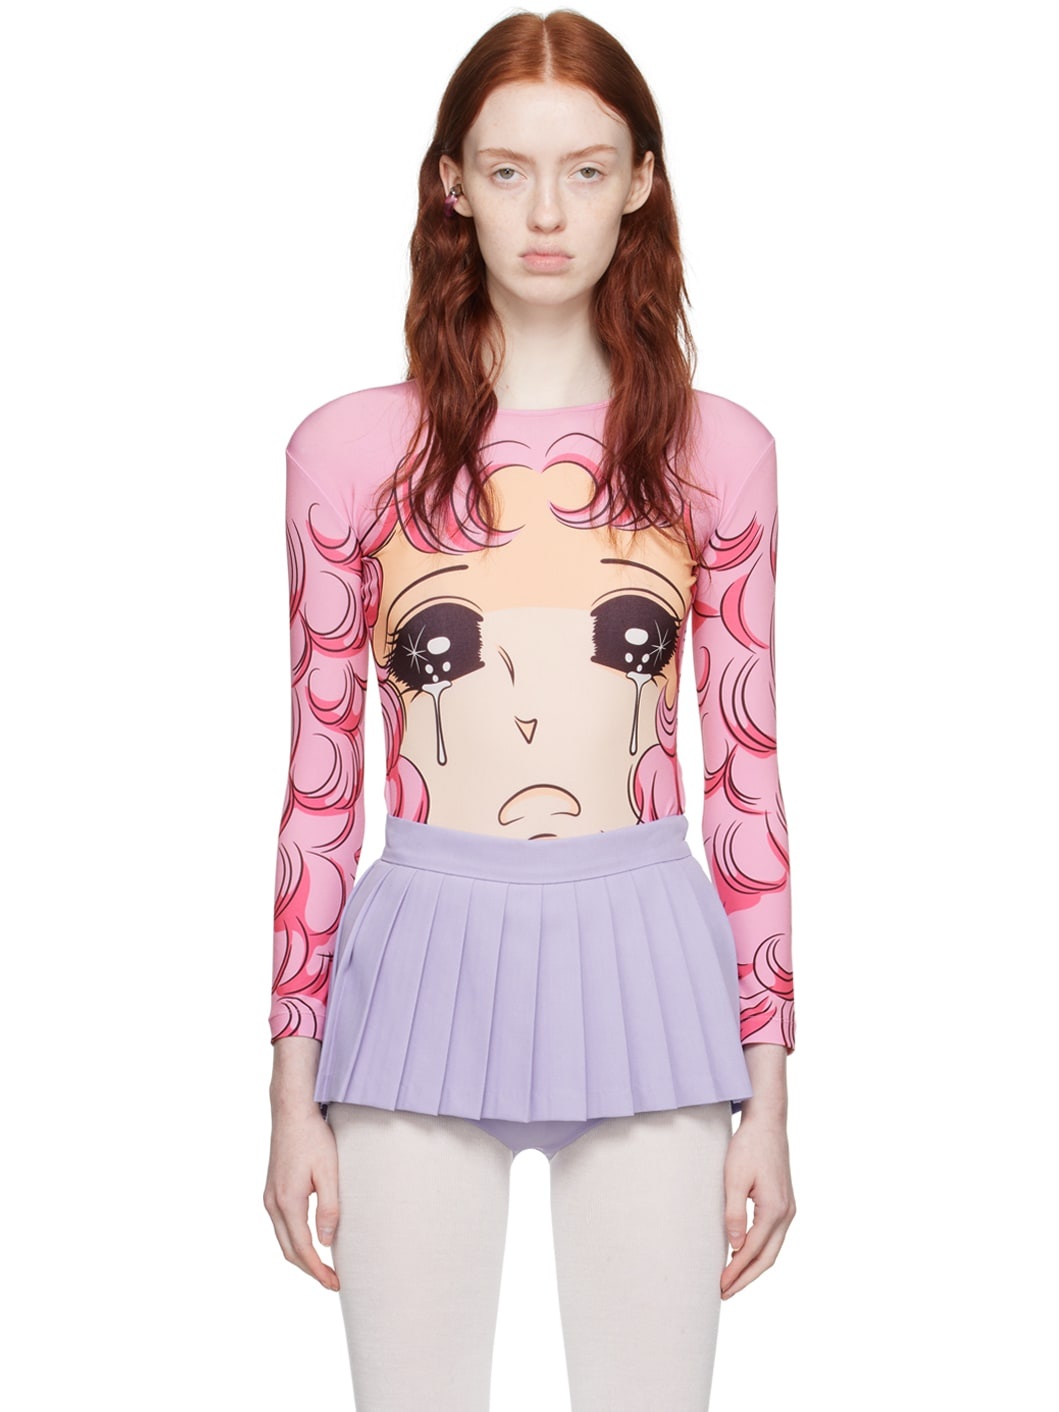 SSENSE Exclusive Pink Crying Girl Long Sleeve T-Shirt - 1